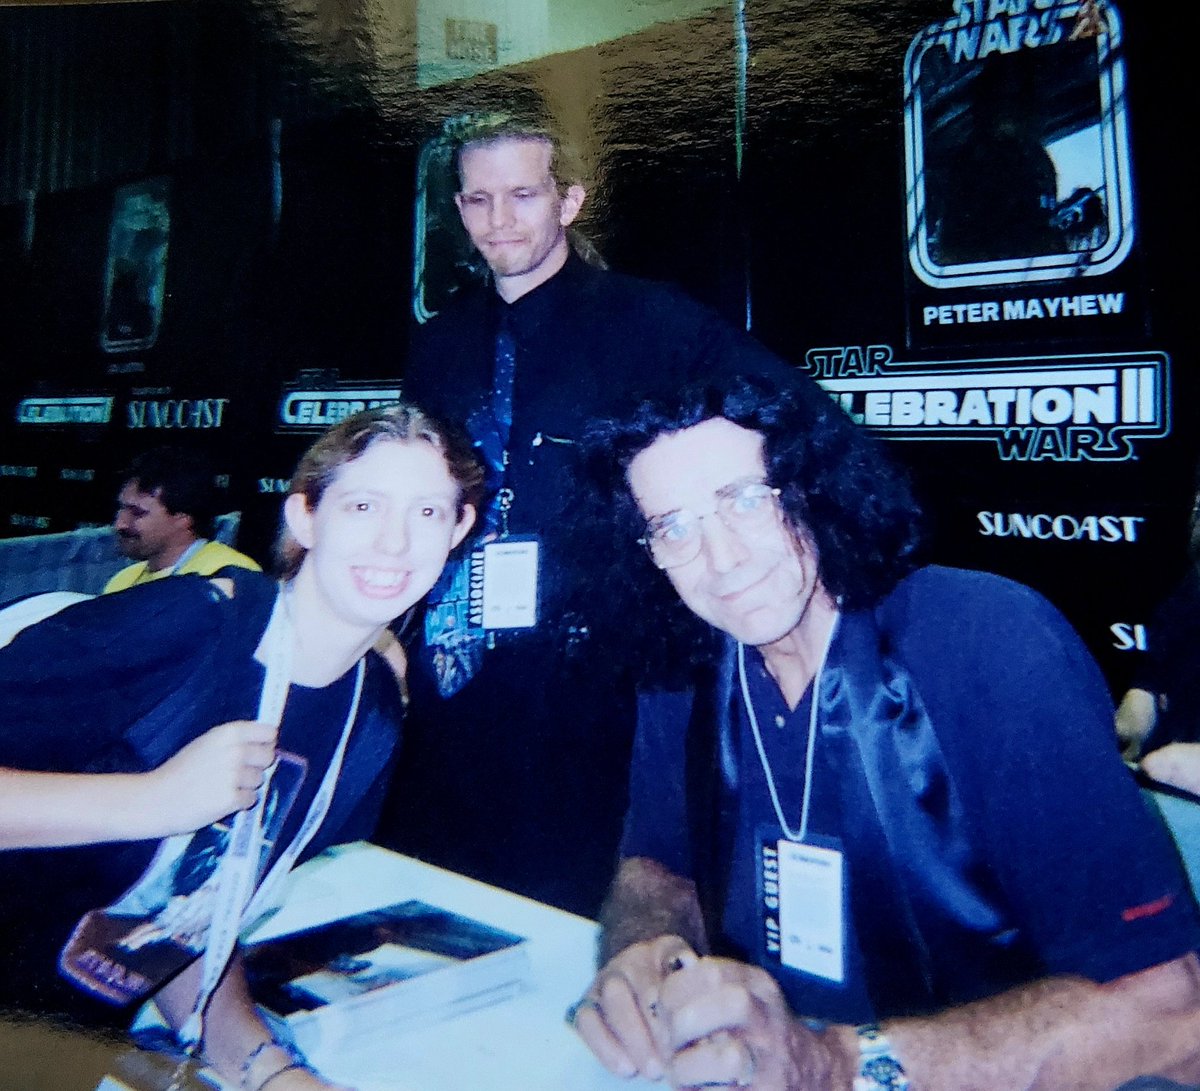 I don't typically post pics of myself, but in honor of #StarWarsDay here is a picture of me meeting the wonderful Peter Mayhew. https://t.co/qIR9xDNAY9